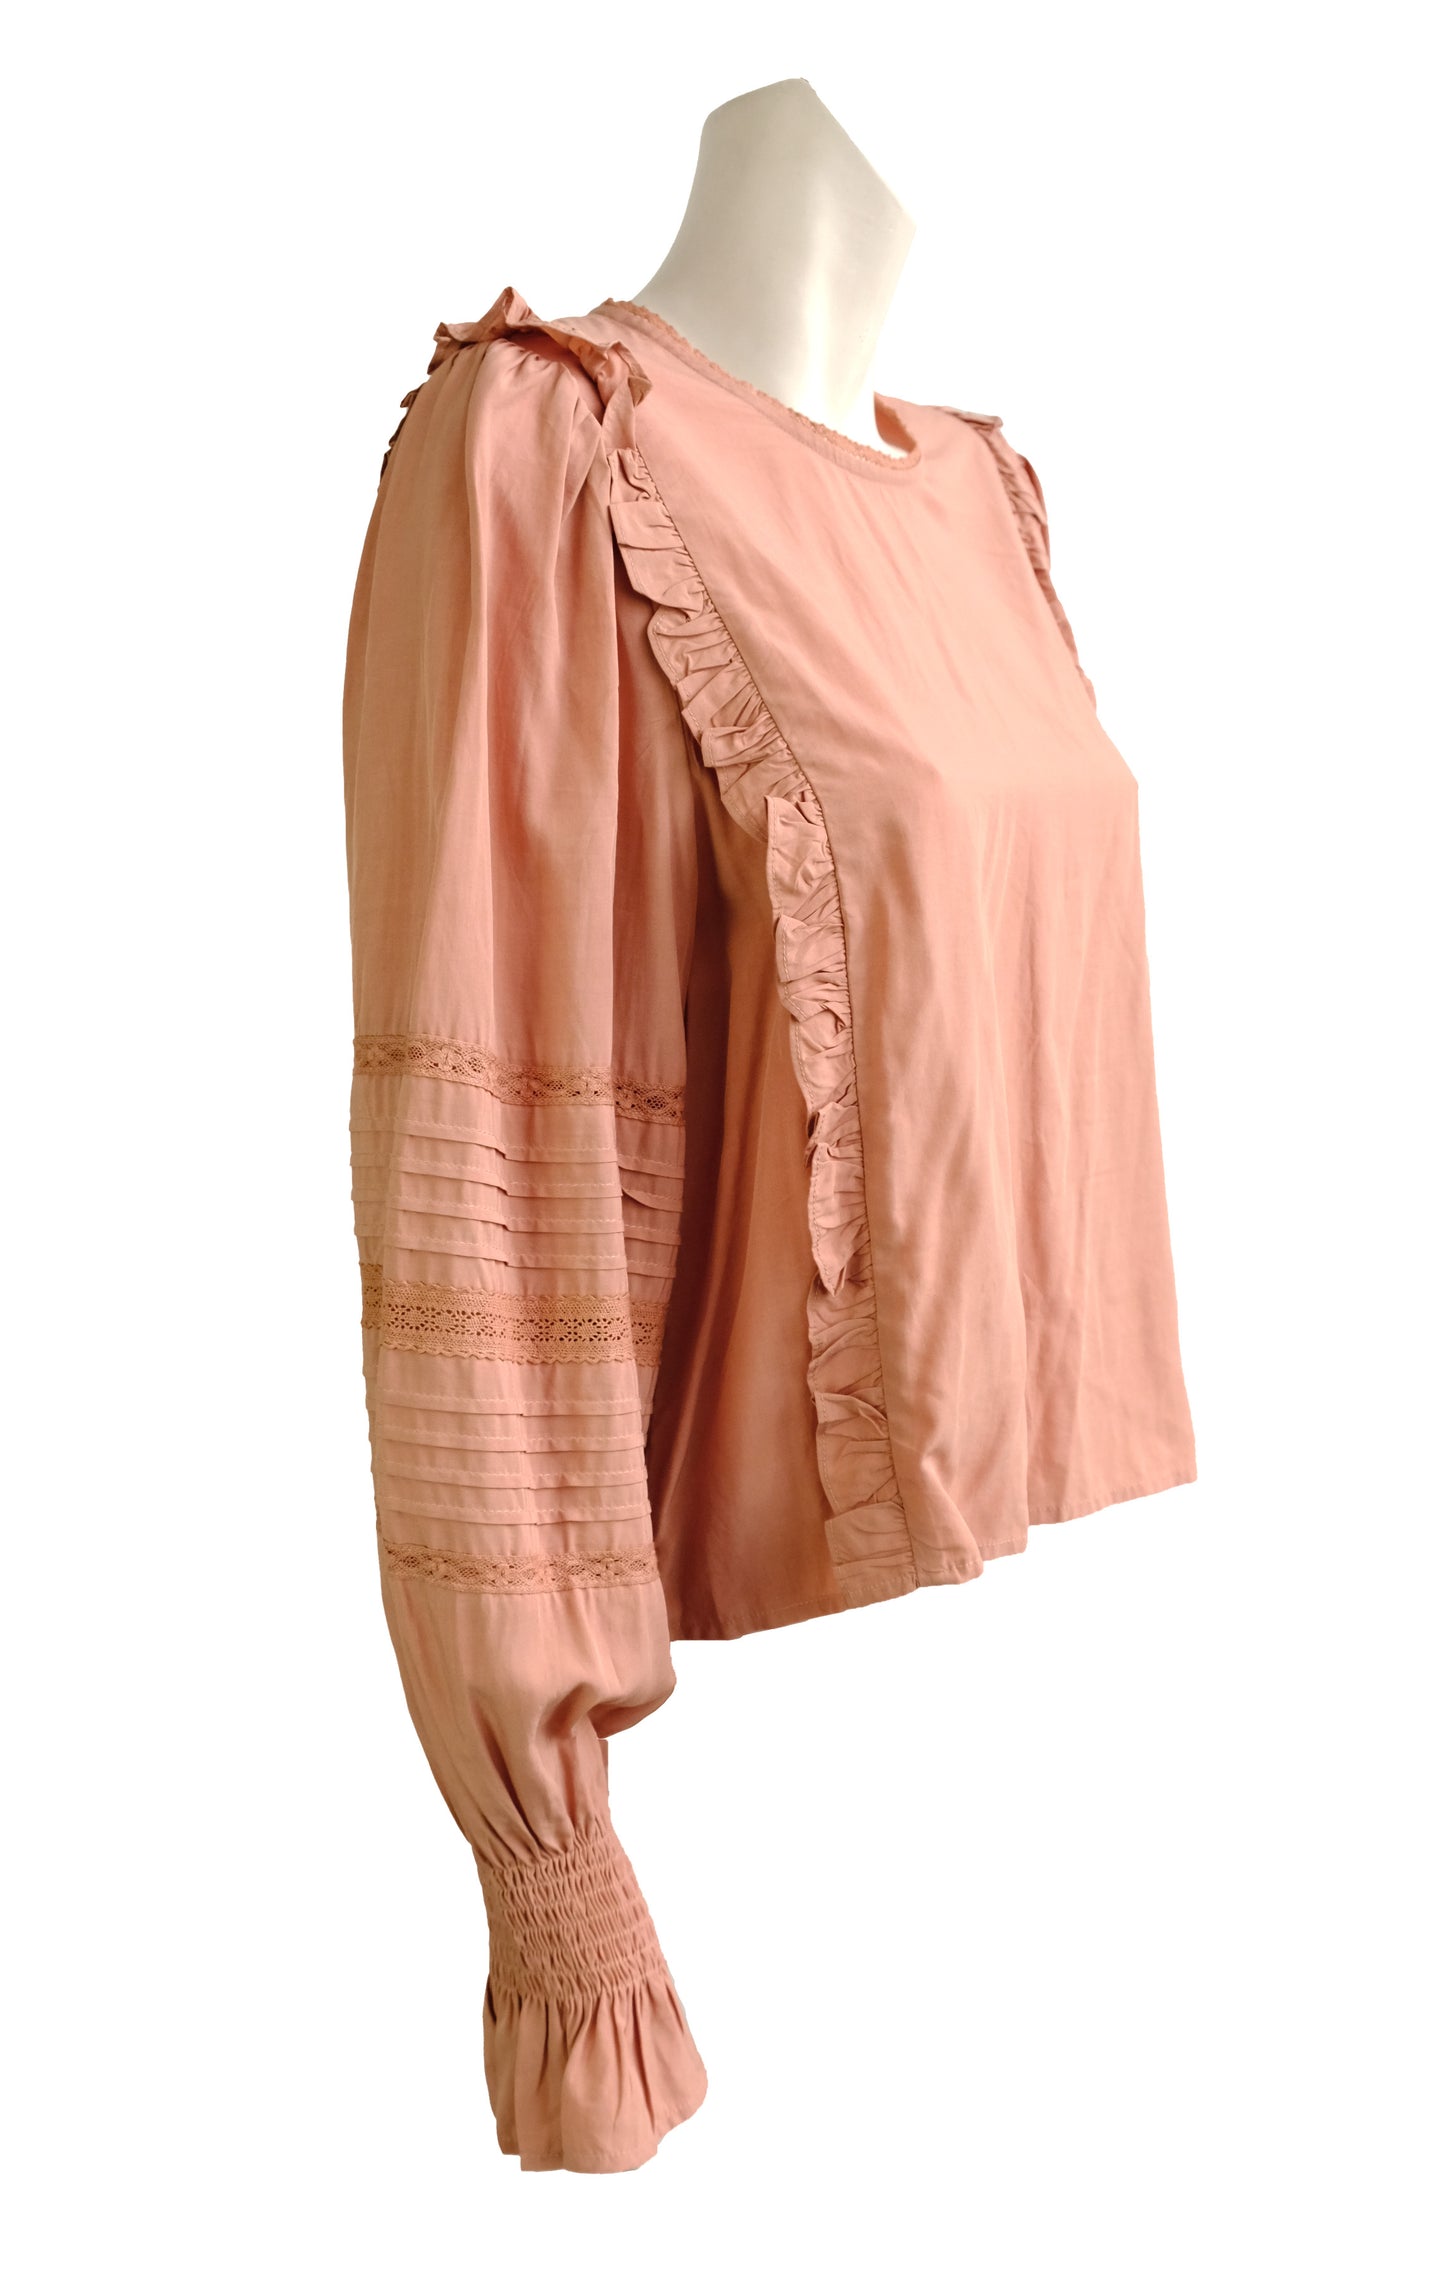 Meadows Dusky Pink Blouse with Frills and Lace, UK12